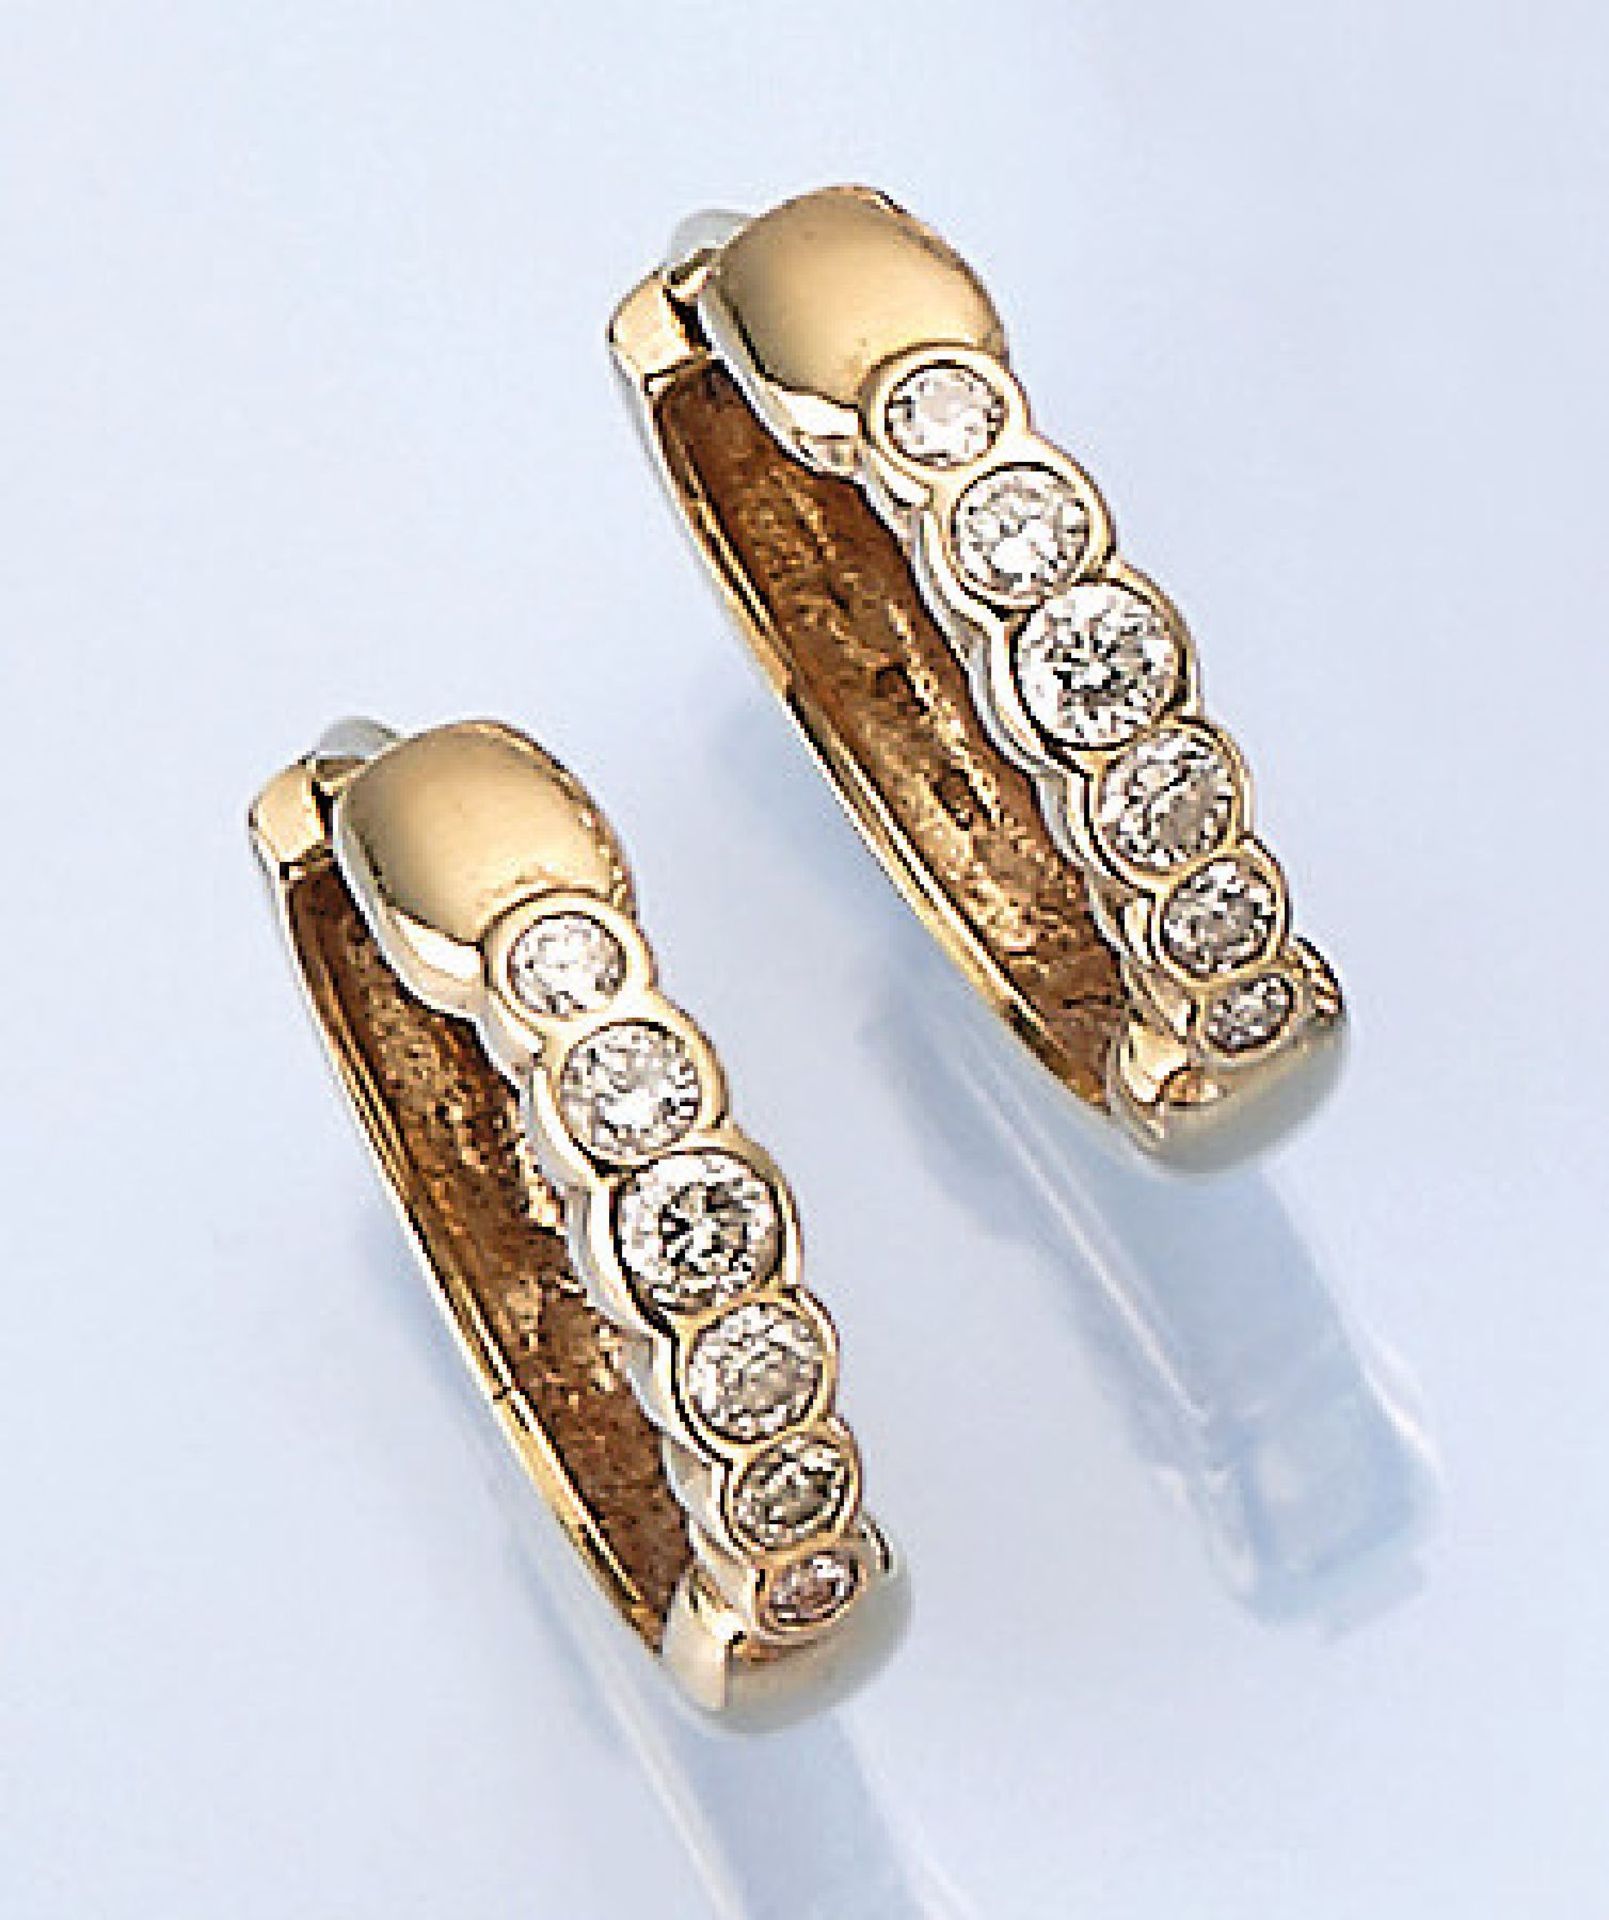 Pair of 14 kt gold hoop earrings with brilliants , YG 585/000, brilliants total approx. 0.78 ct